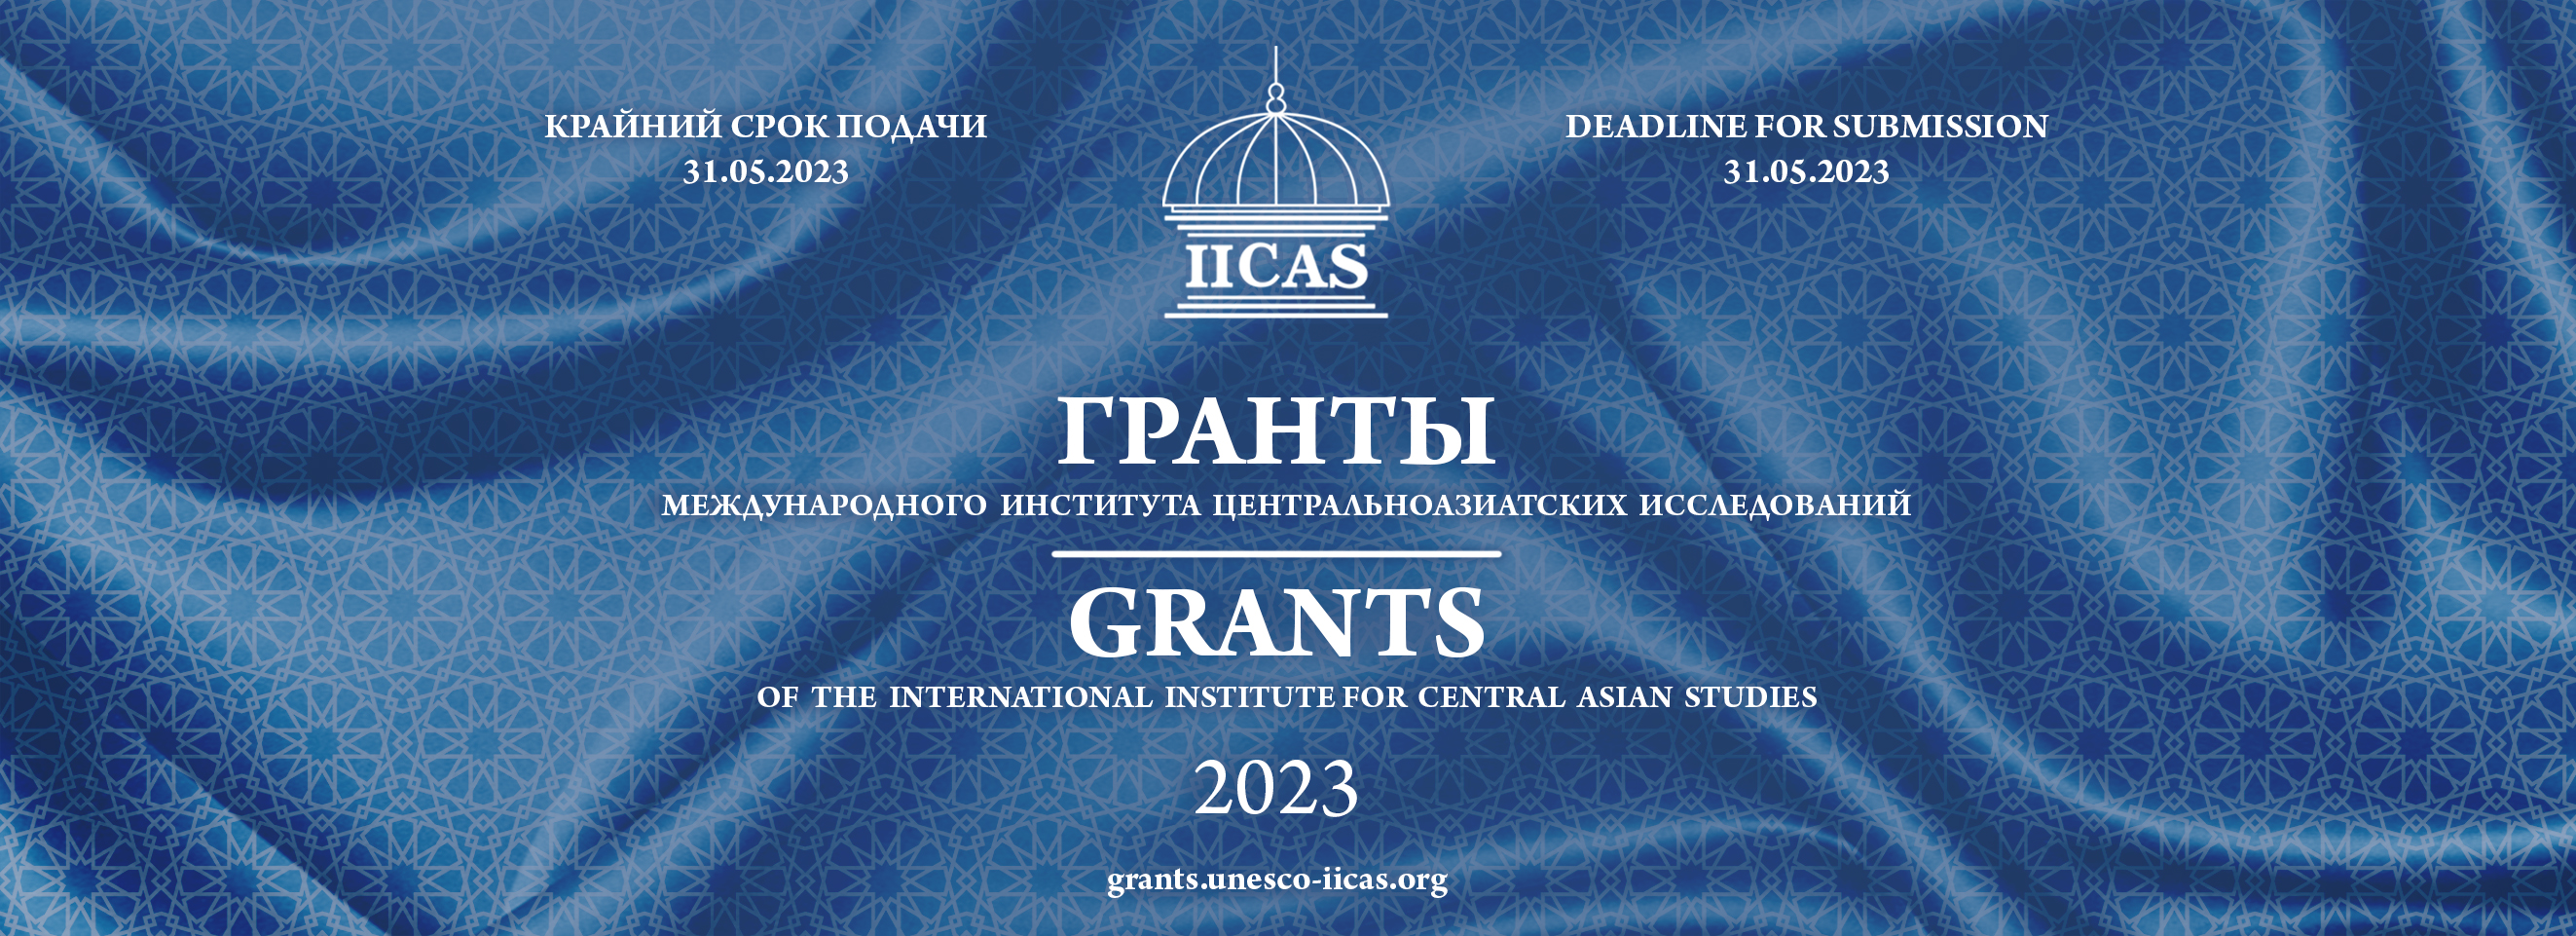 IICAS announces the call for applications for biannual grants under the 2024-2025 Academic Program